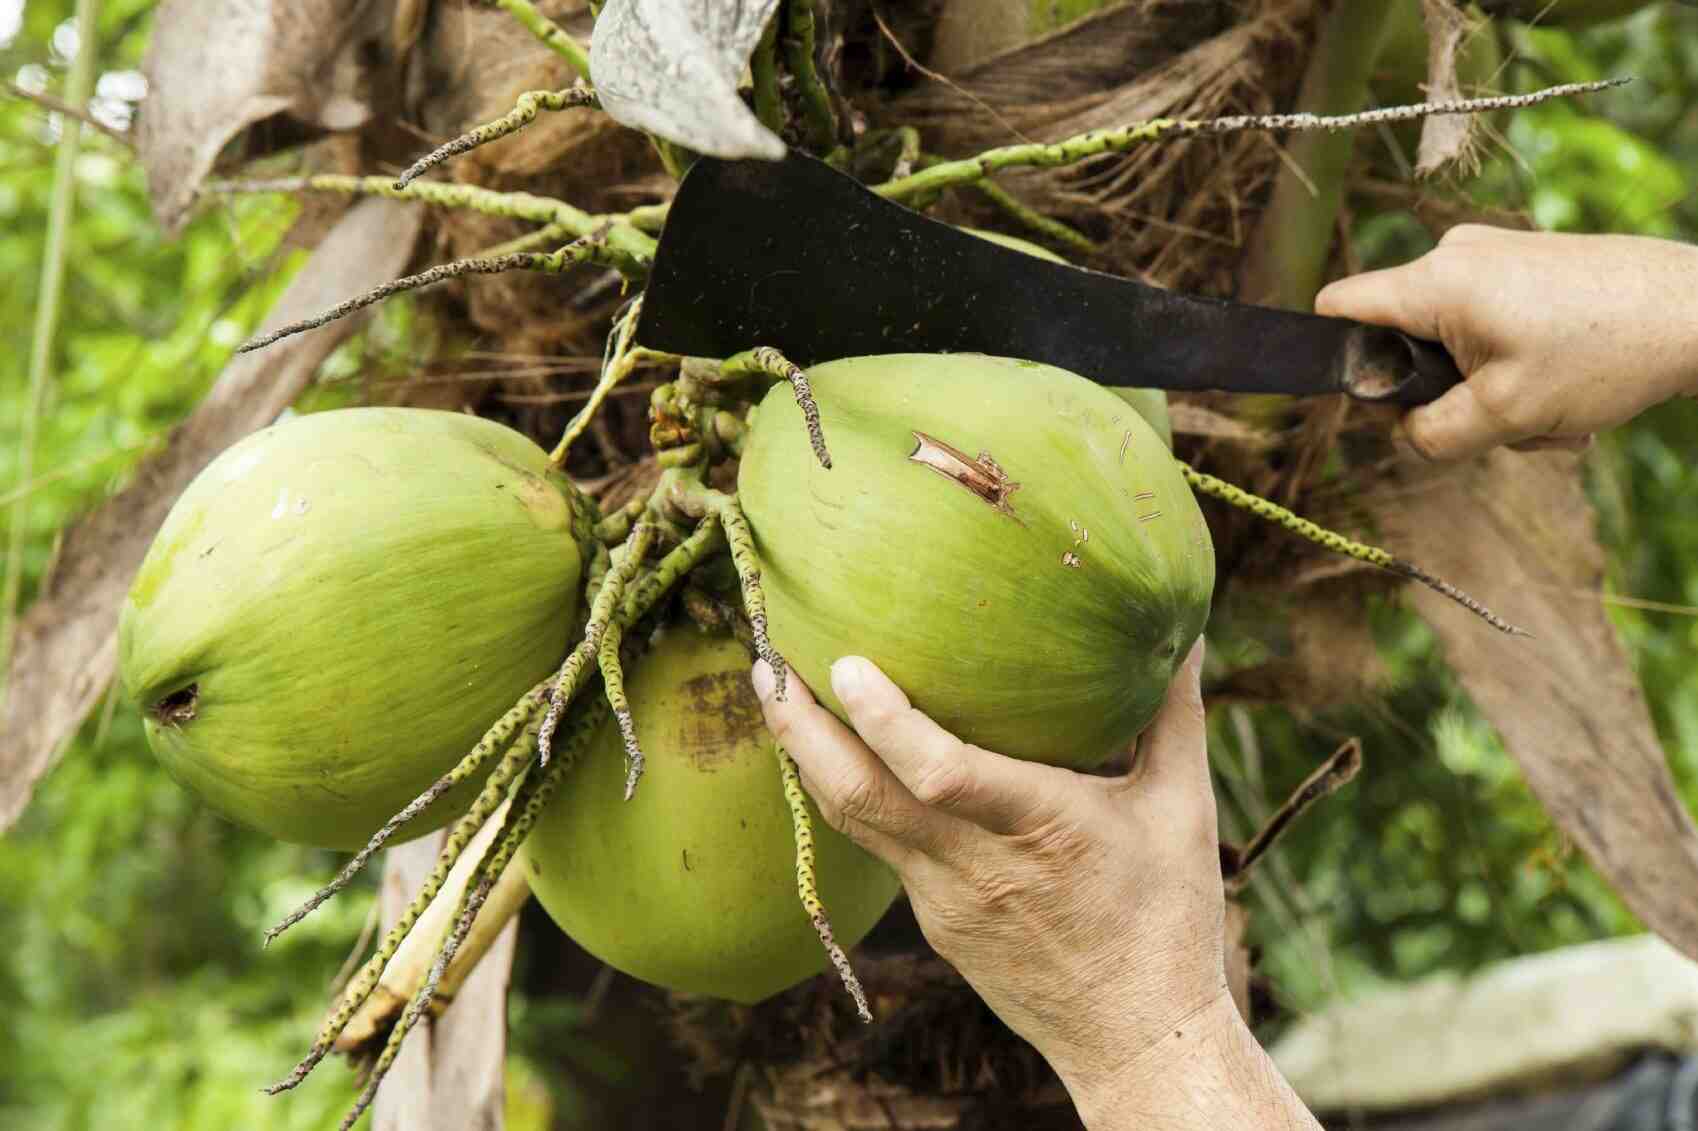 How do I tell if a coconut is ripe?